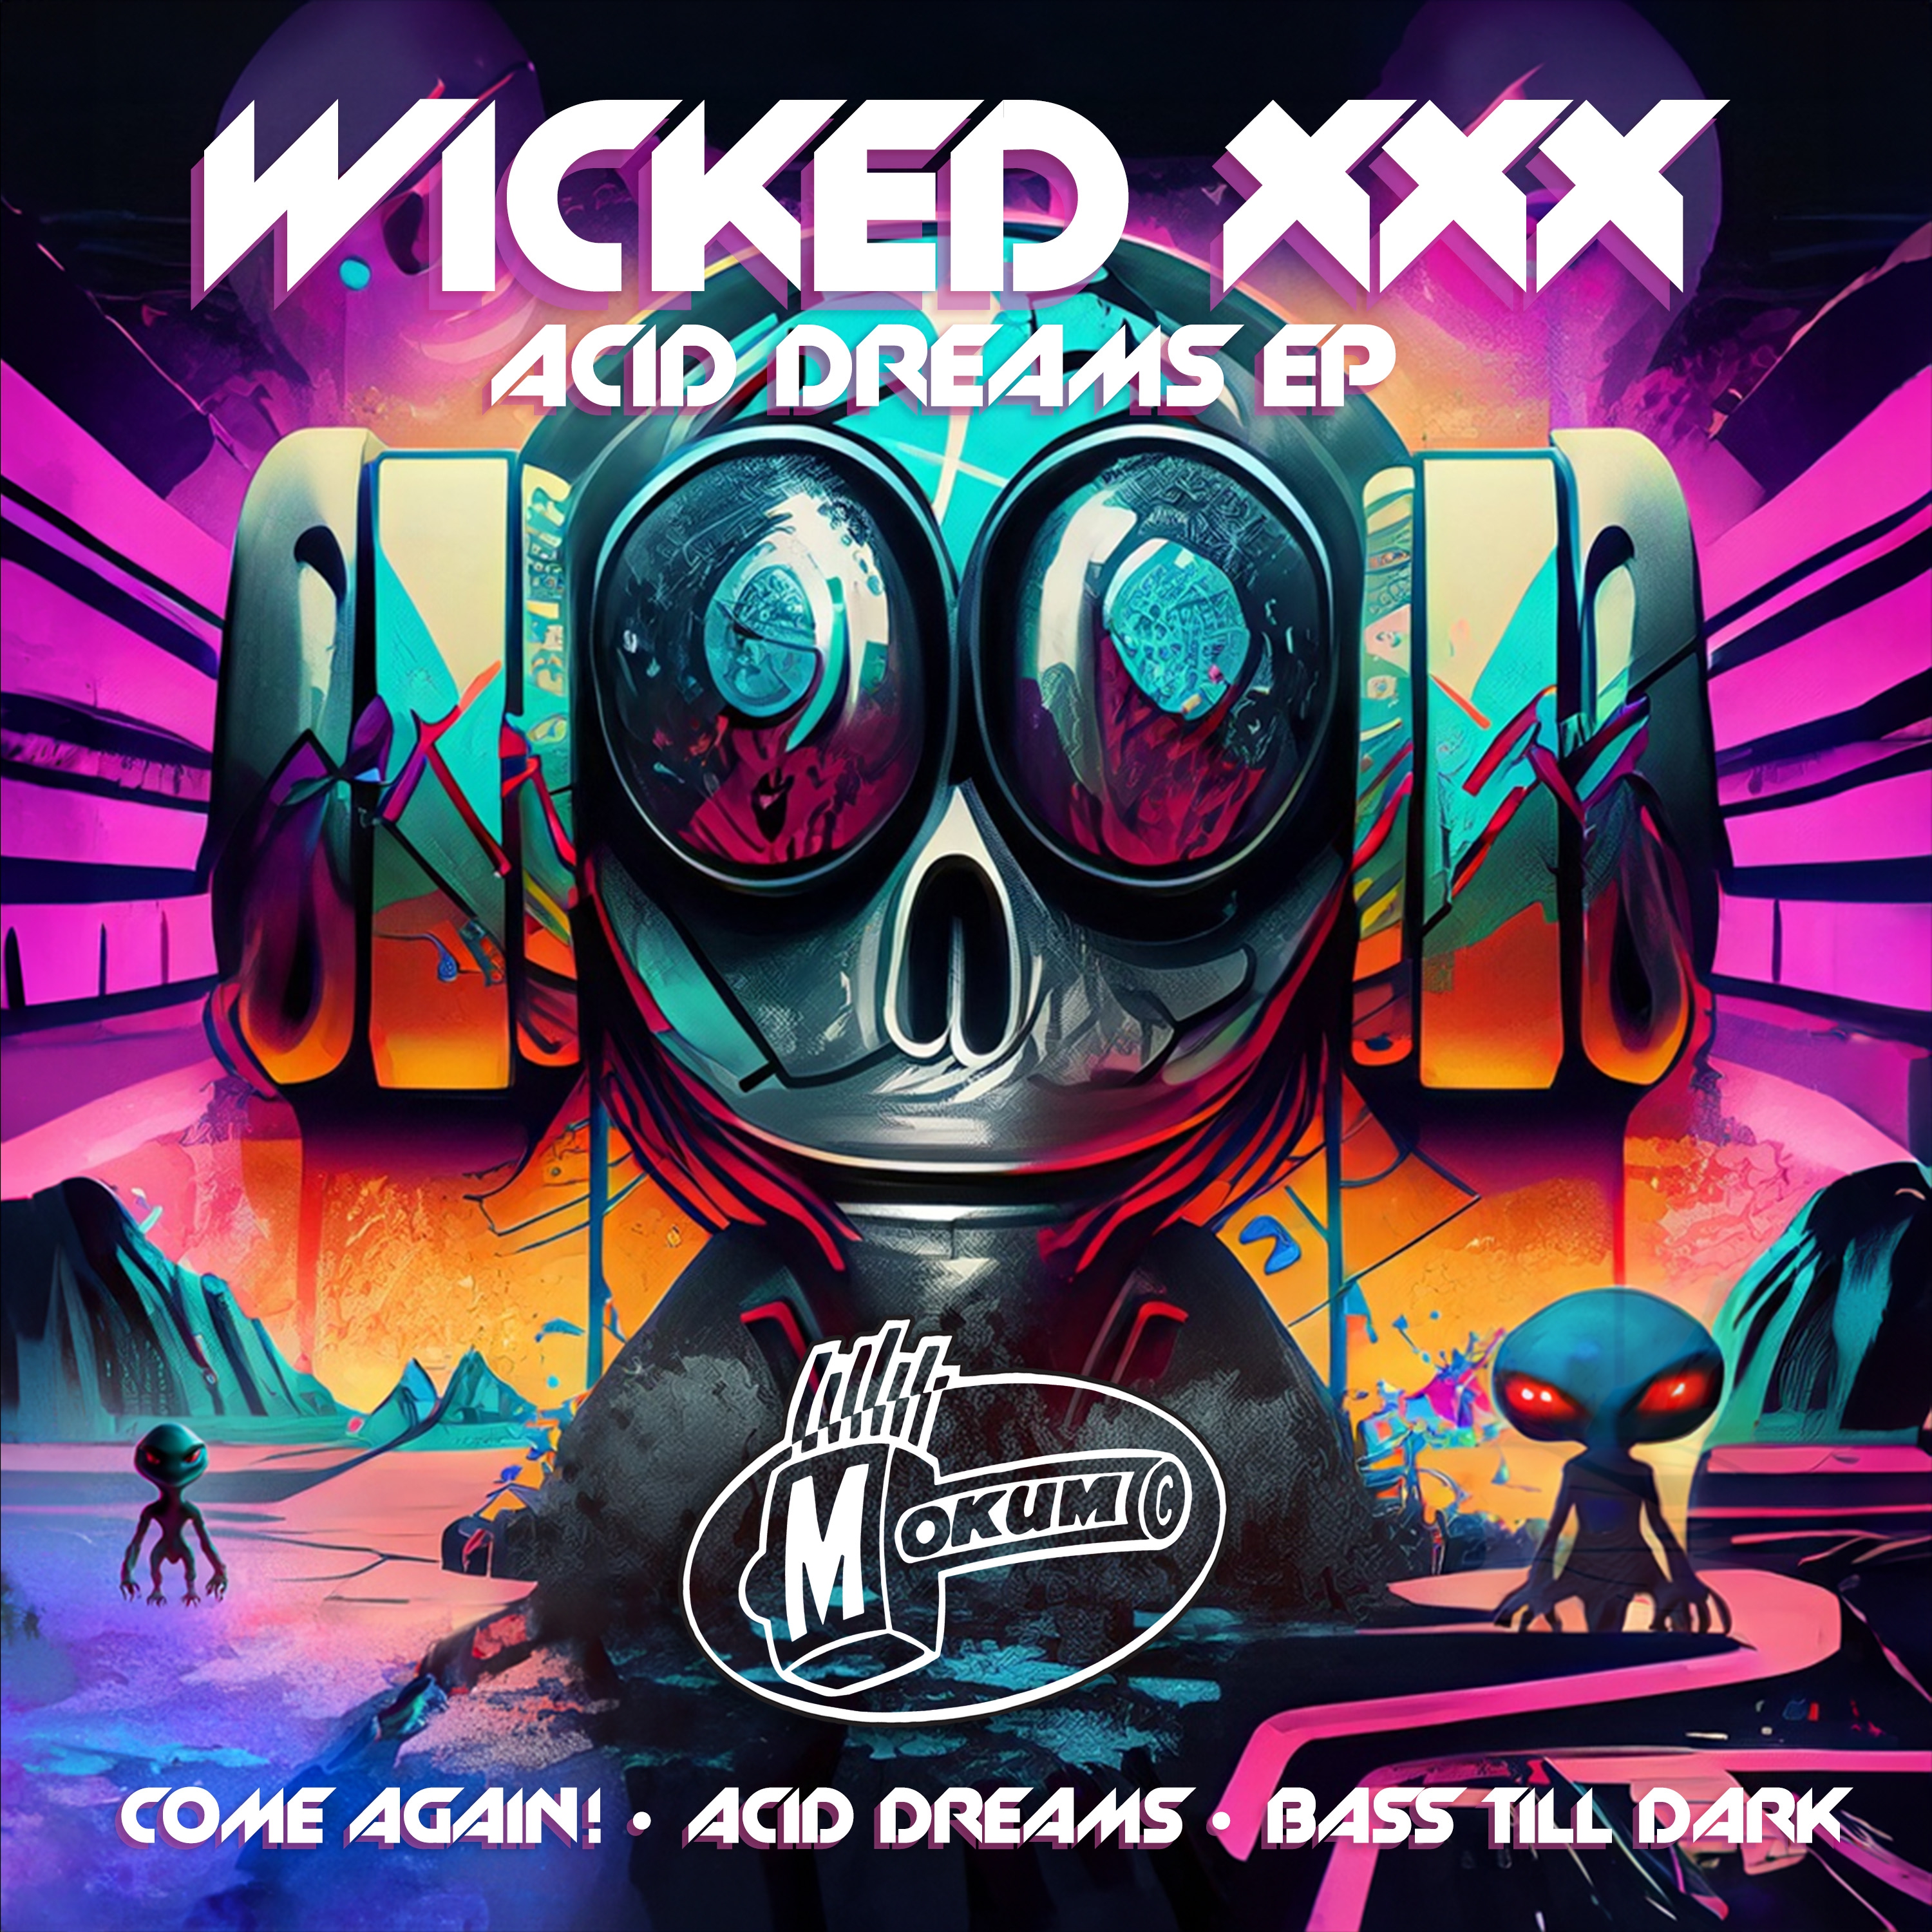 Wicked XXX - Acid Dreams - MP3 and WAV downloads at Hardtunes